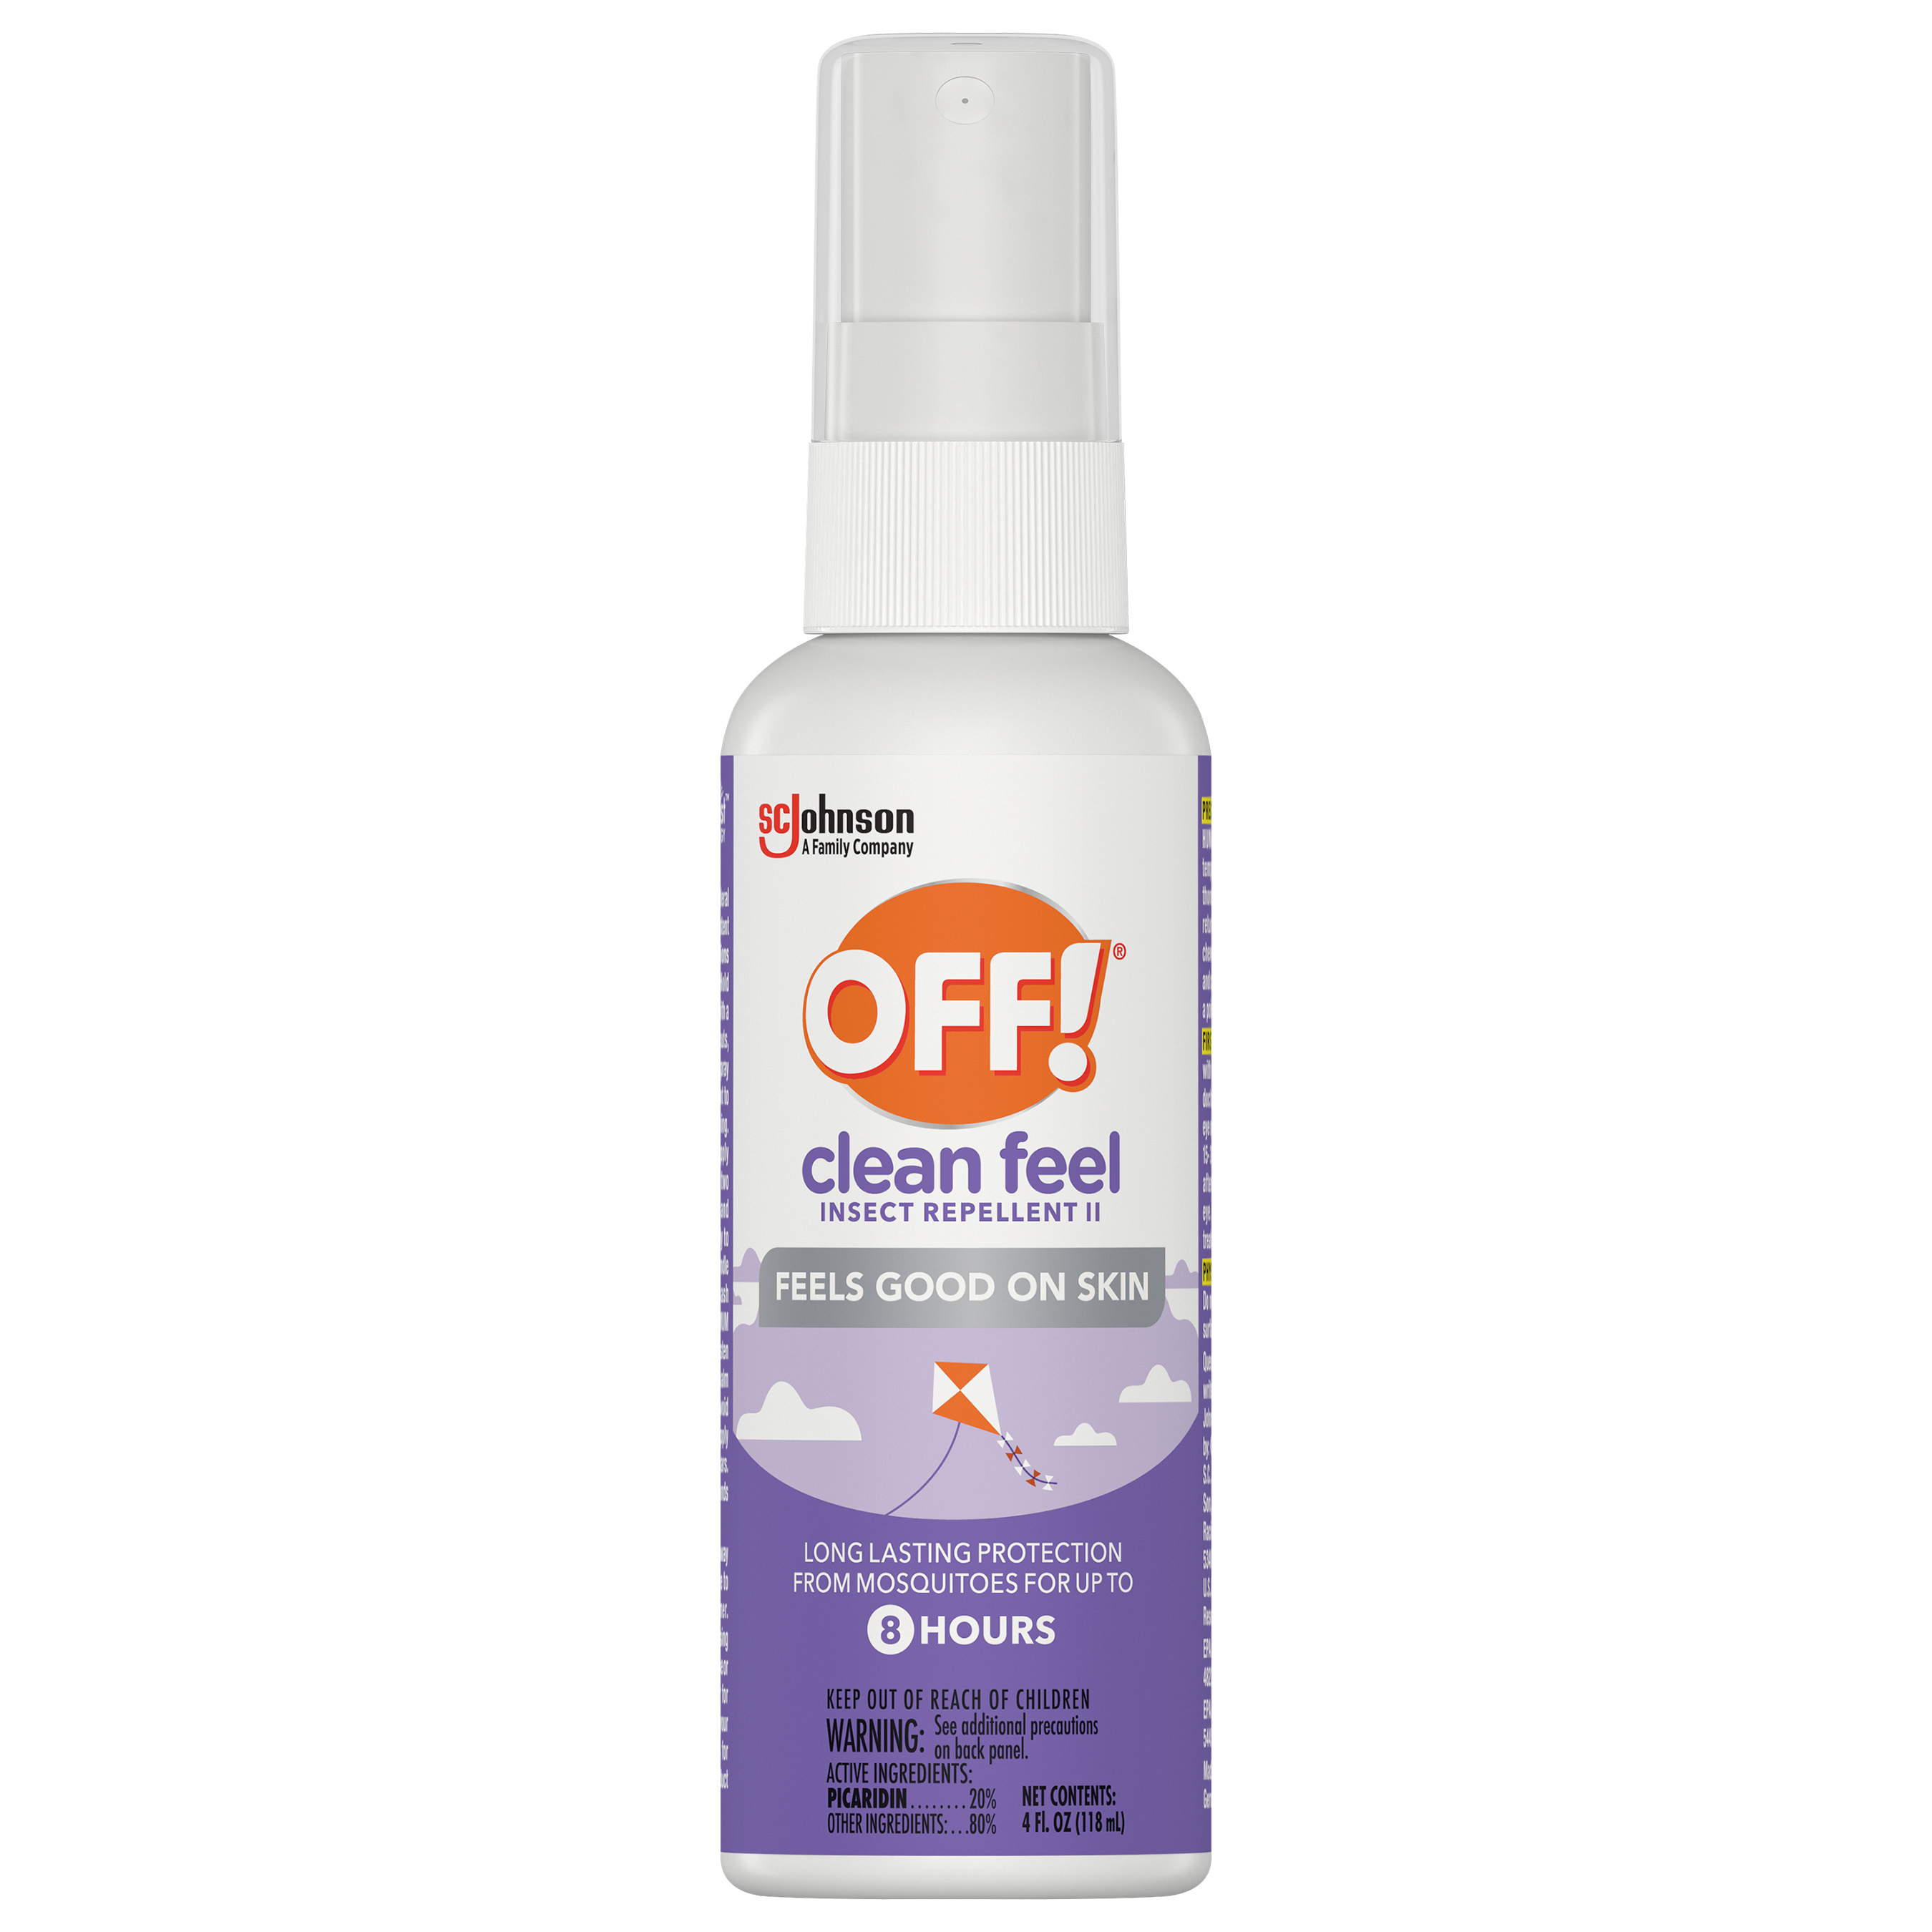 Clean Feel Insect Repellent Spray